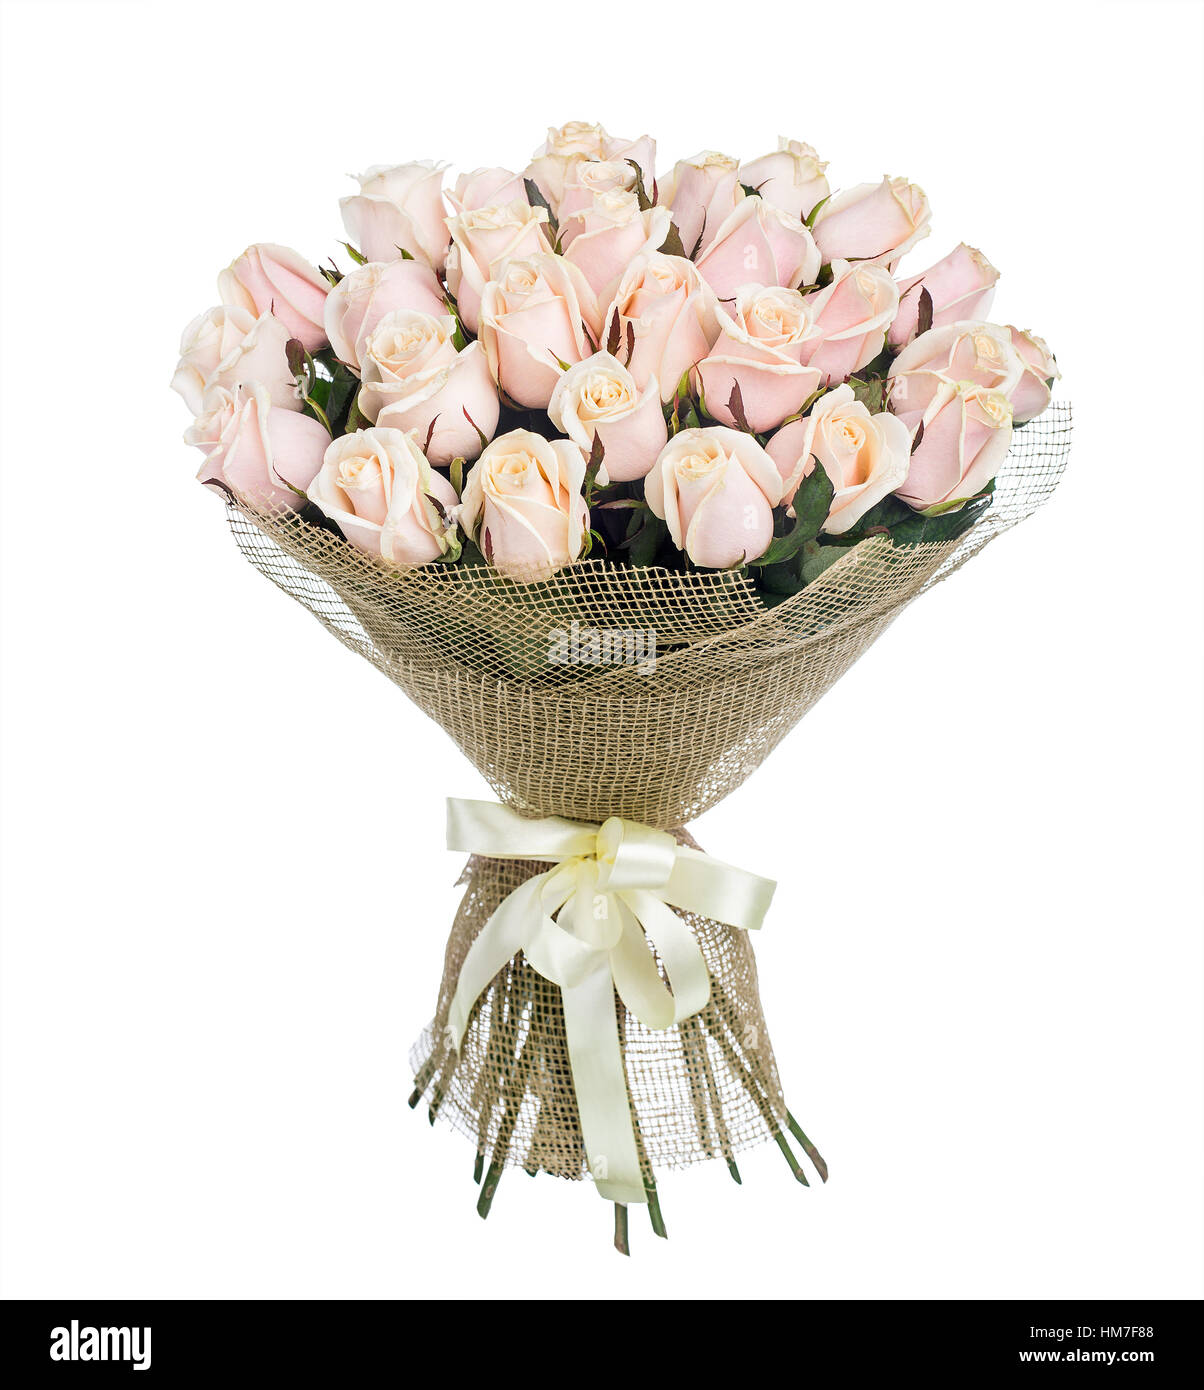 Flower bouquet of pink roses Stock Photo